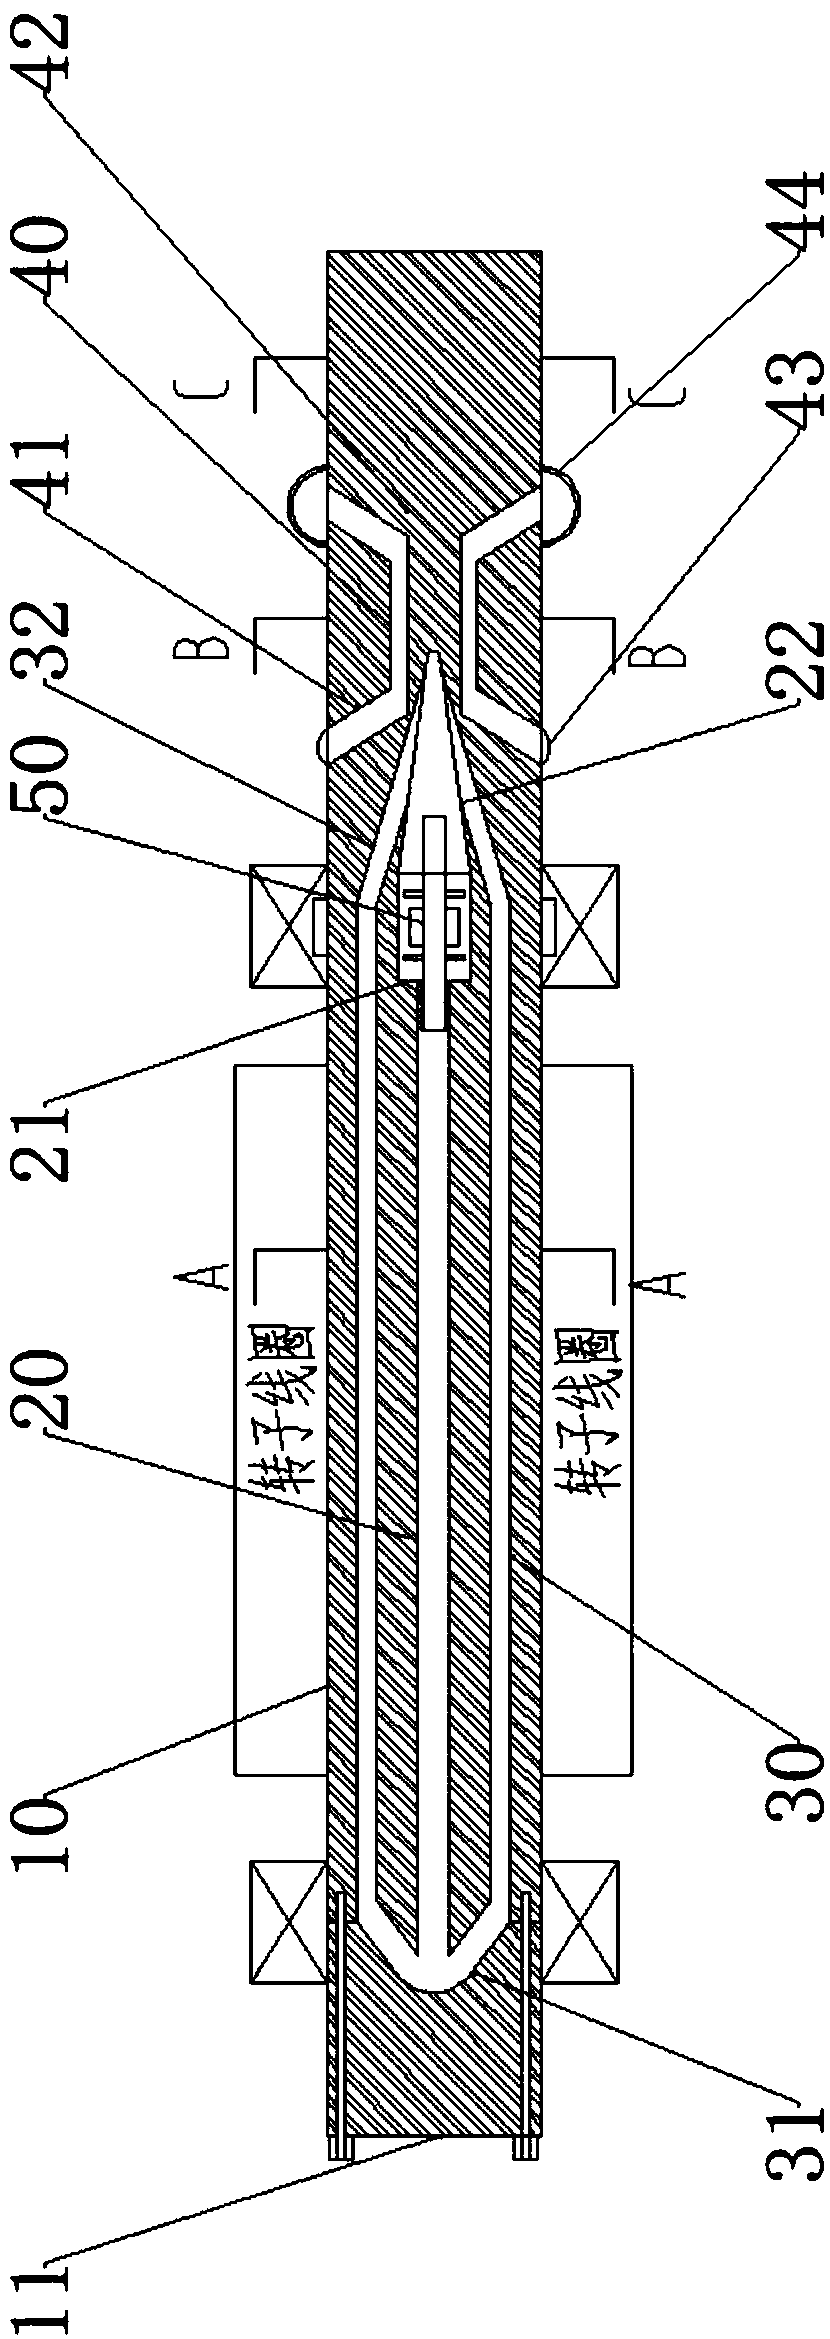 Motor rotating shaft with forced cooling device